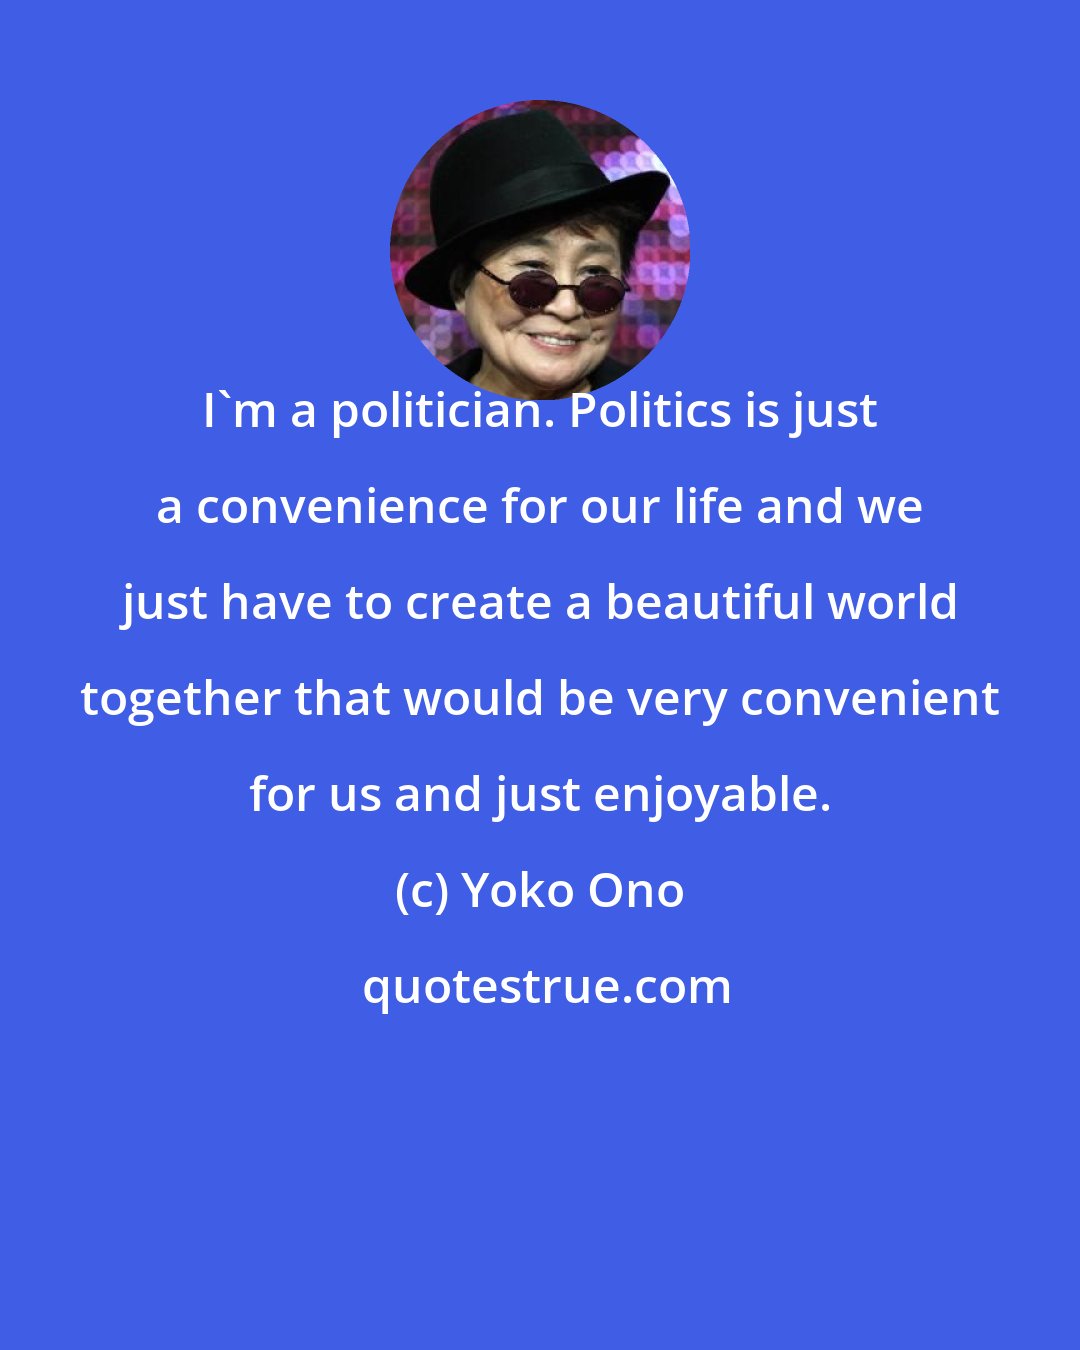 Yoko Ono: I'm a politician. Politics is just a convenience for our life and we just have to create a beautiful world together that would be very convenient for us and just enjoyable.